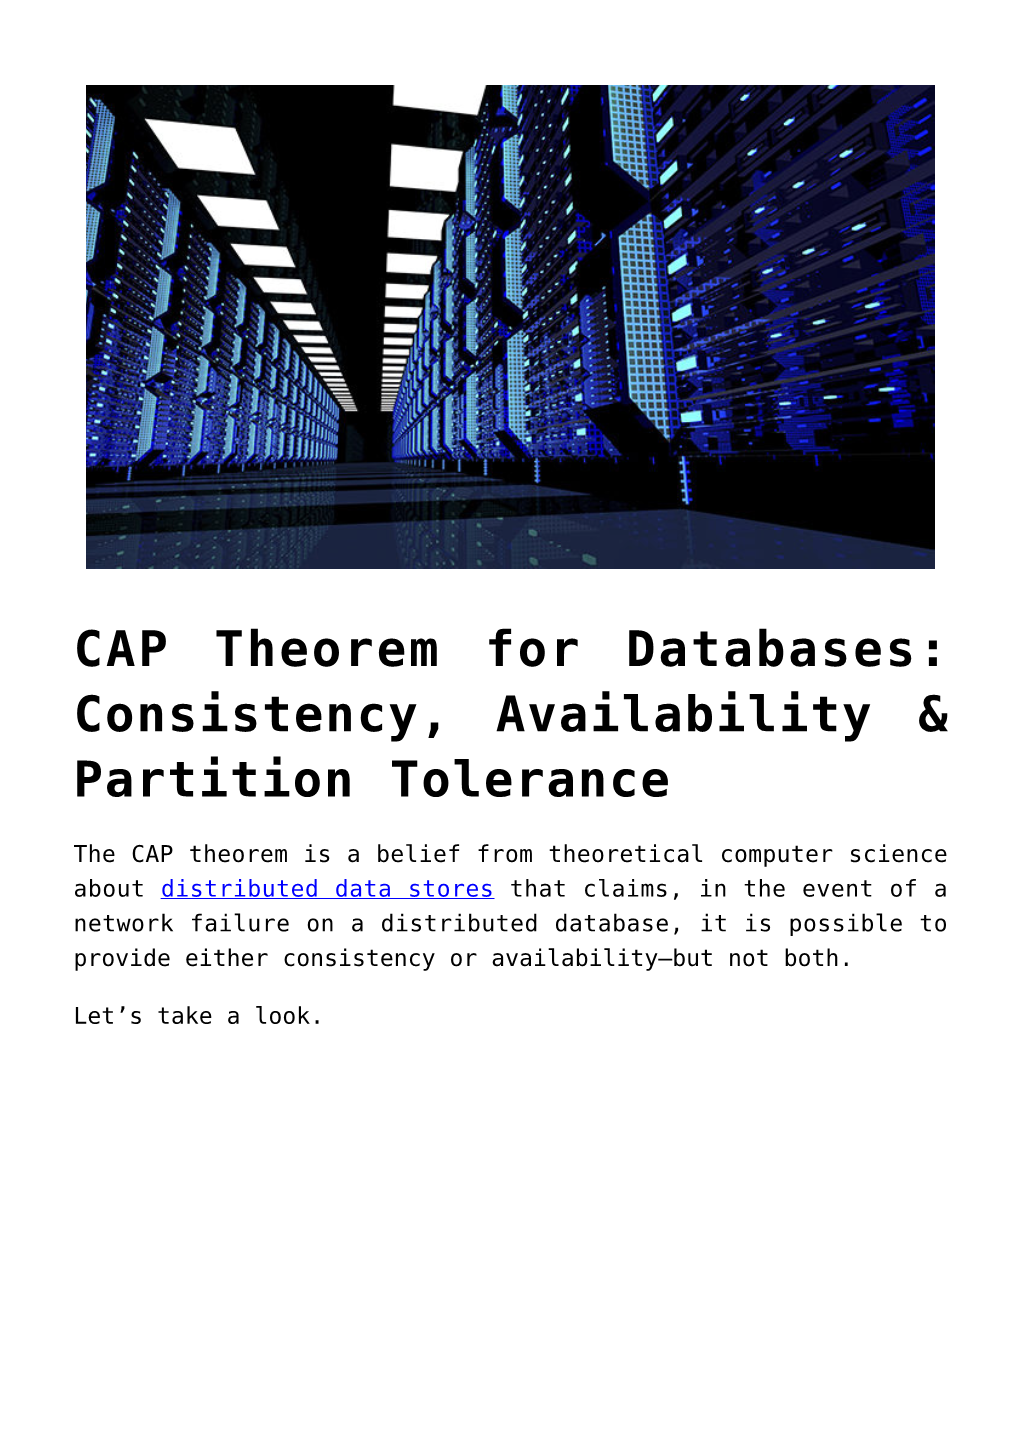 CAP Theorem for Databases: Consistency, Availability &#038